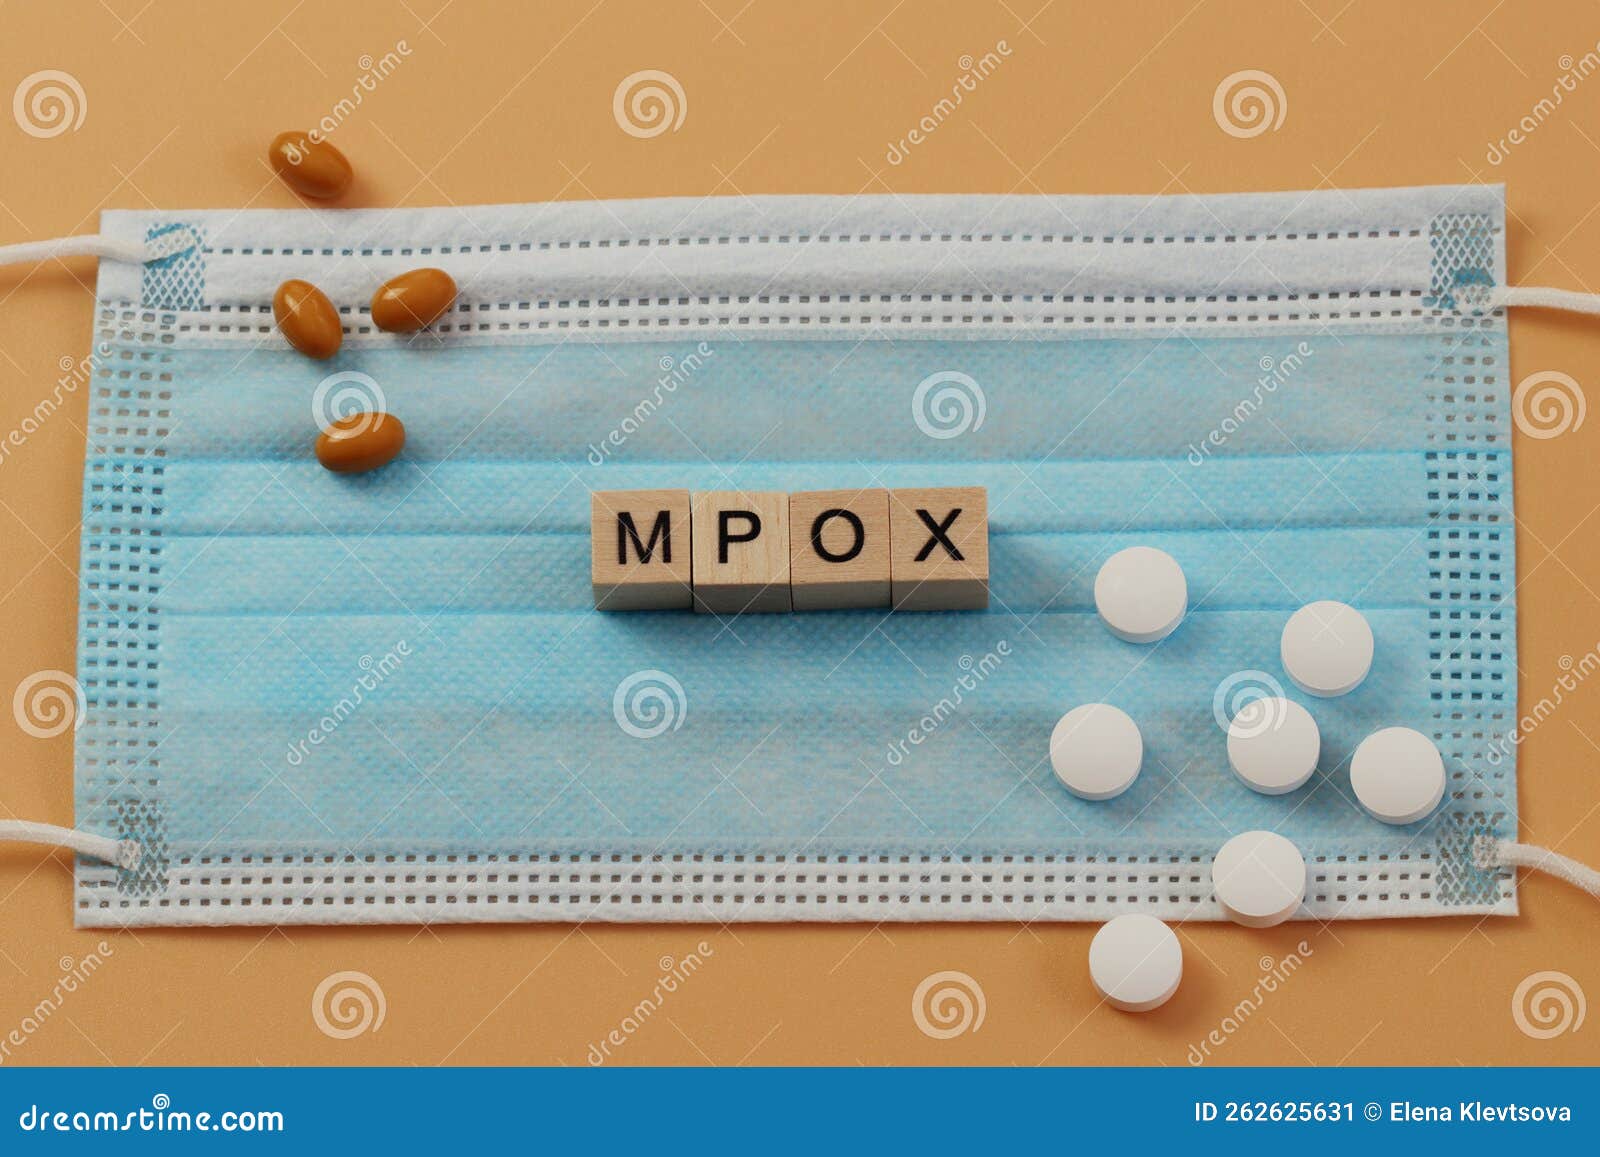 mpox is laid out with wooden cubes on a surgical face mask.